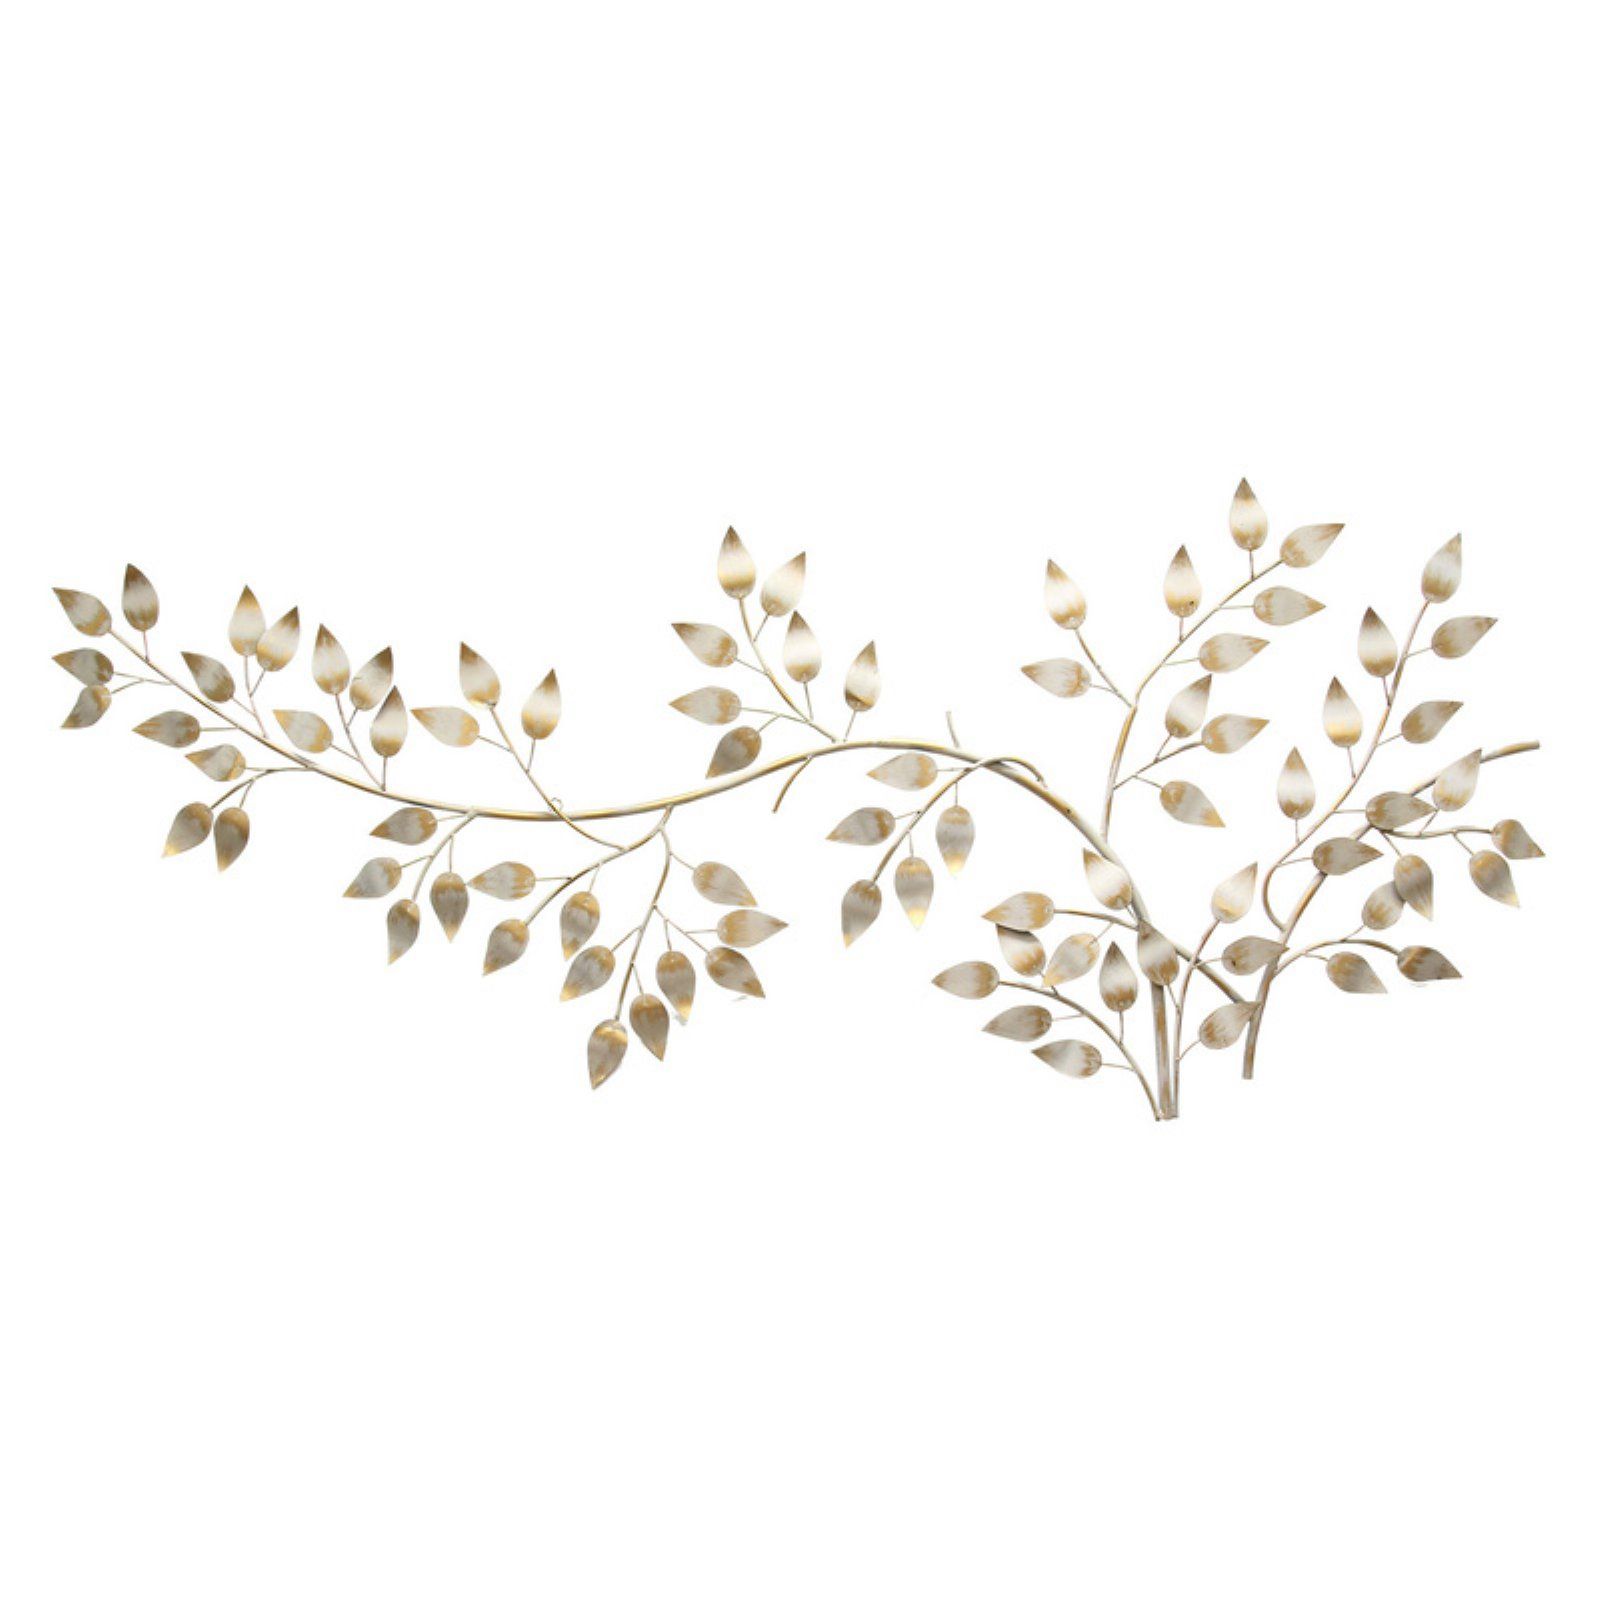 Stratton Home Decor Brushed Gold Flowing Leaves Wall Decor – Walmart Pertaining To Newest Gold Leaves Wall Art (Gallery 19 of 20)